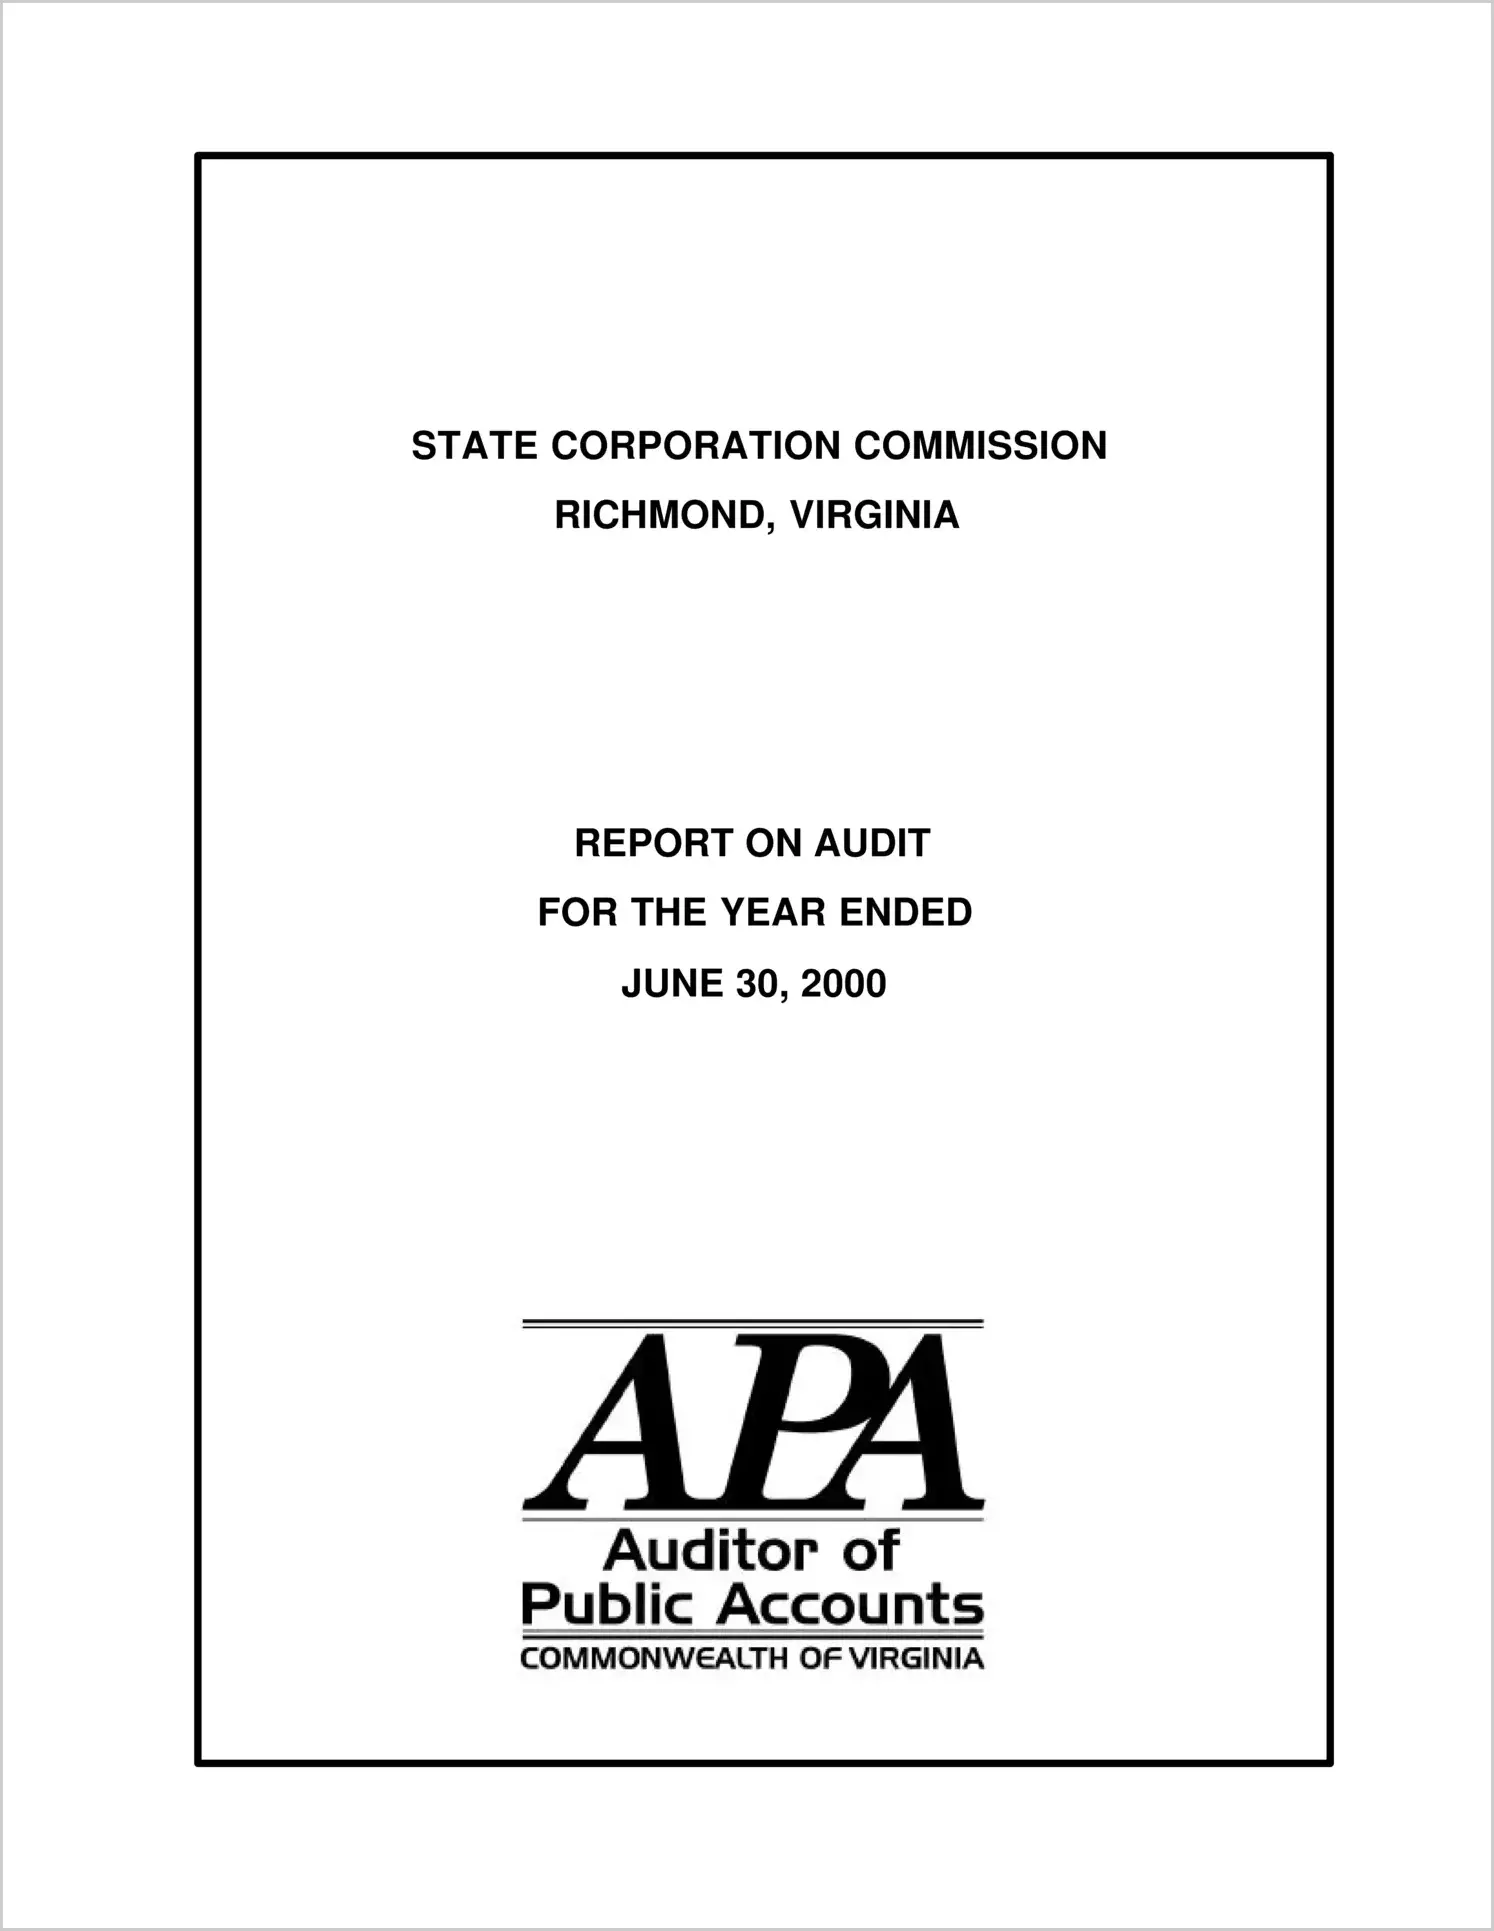 State Corporation Commission for the year ended June 30, 2000